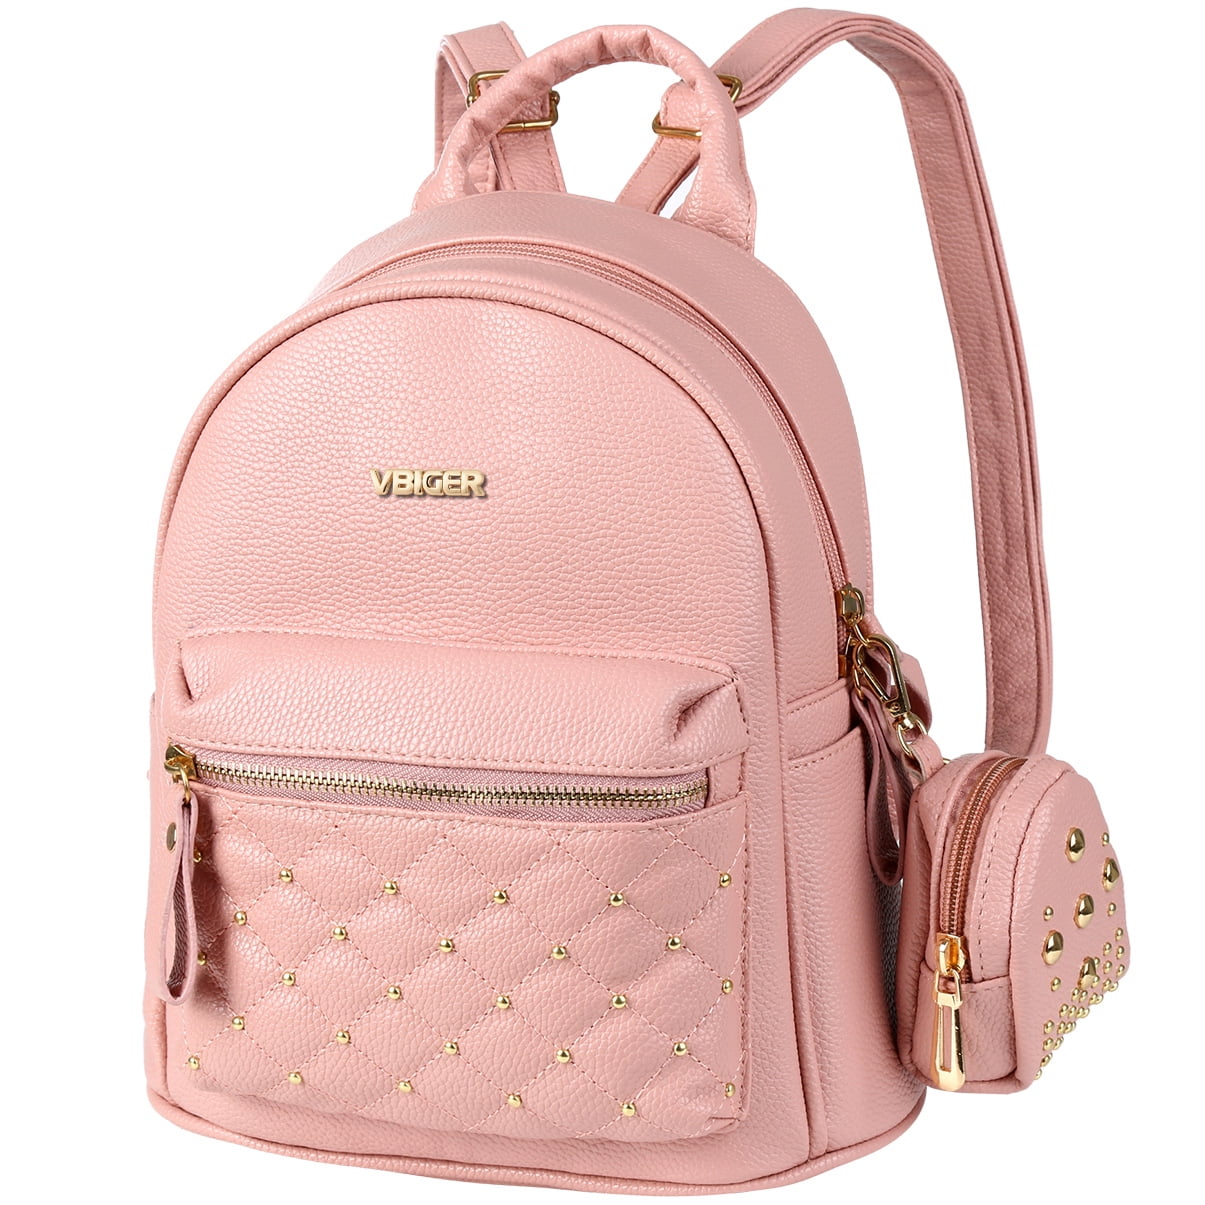 Women Leather Backpacks School Bags For Girls Travel Ladies Bagpack Large A8F7